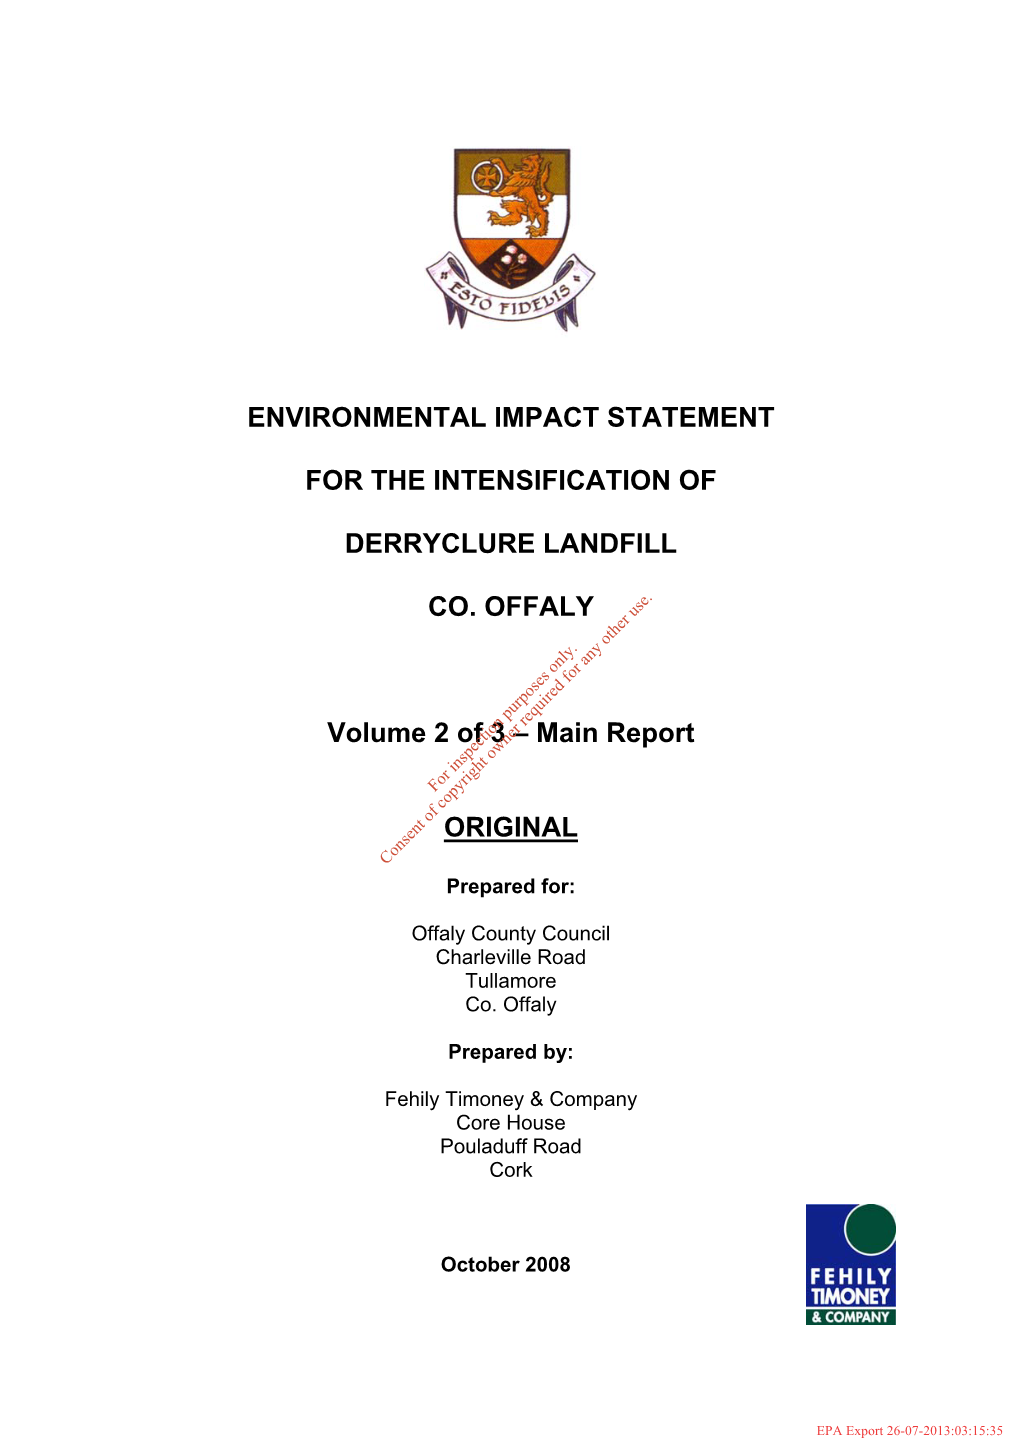 Environmental Impact Statement for The